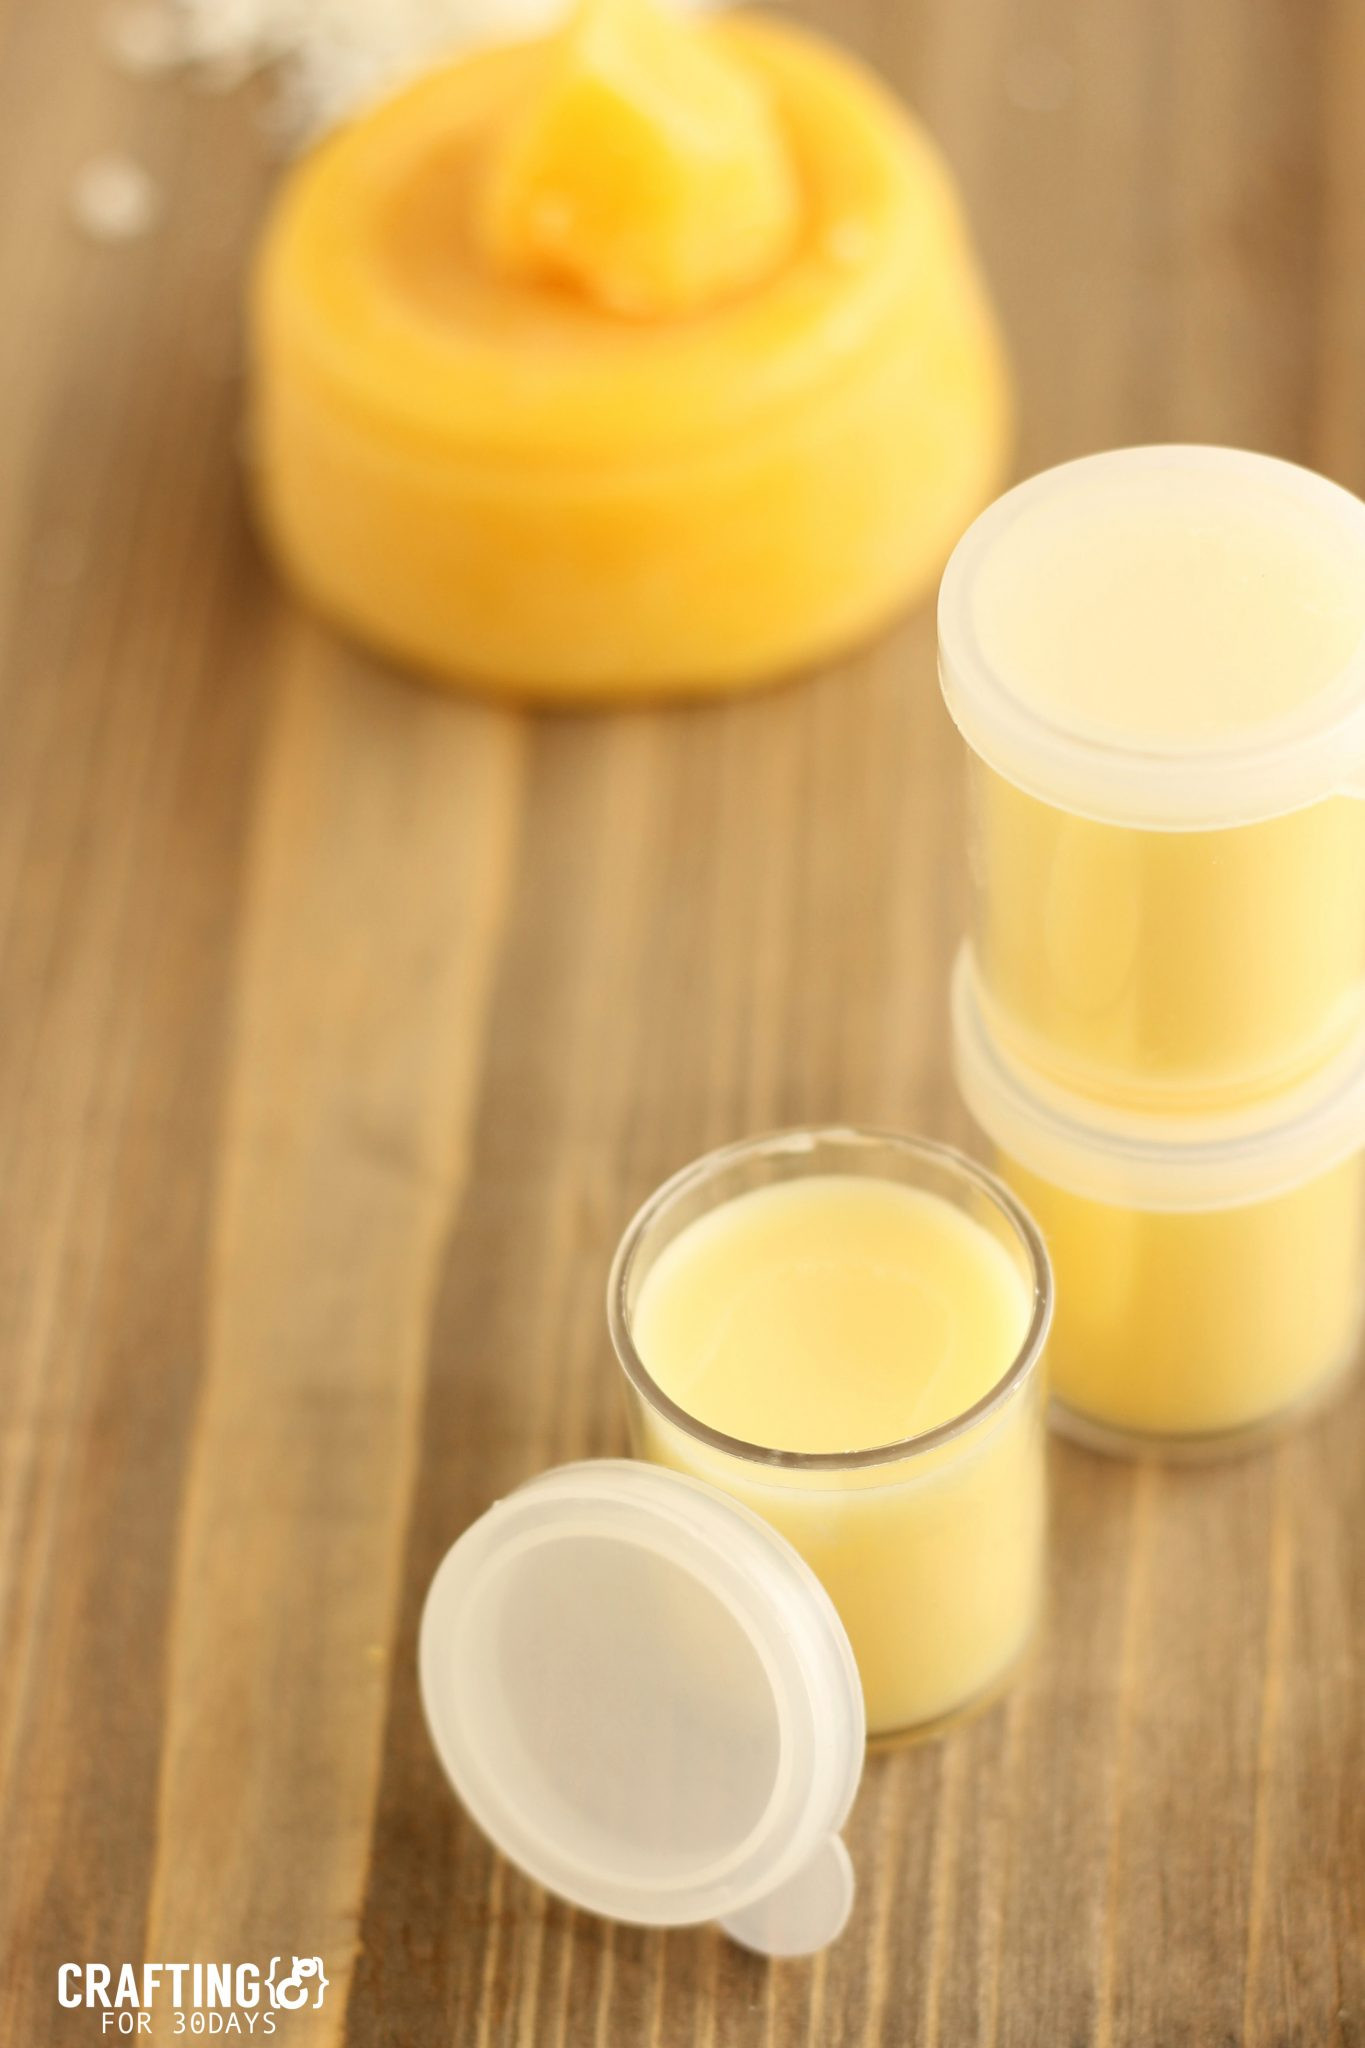 Best ideas about DIY Cuticle Cream
. Save or Pin Homemade Cuticle Cream Now.